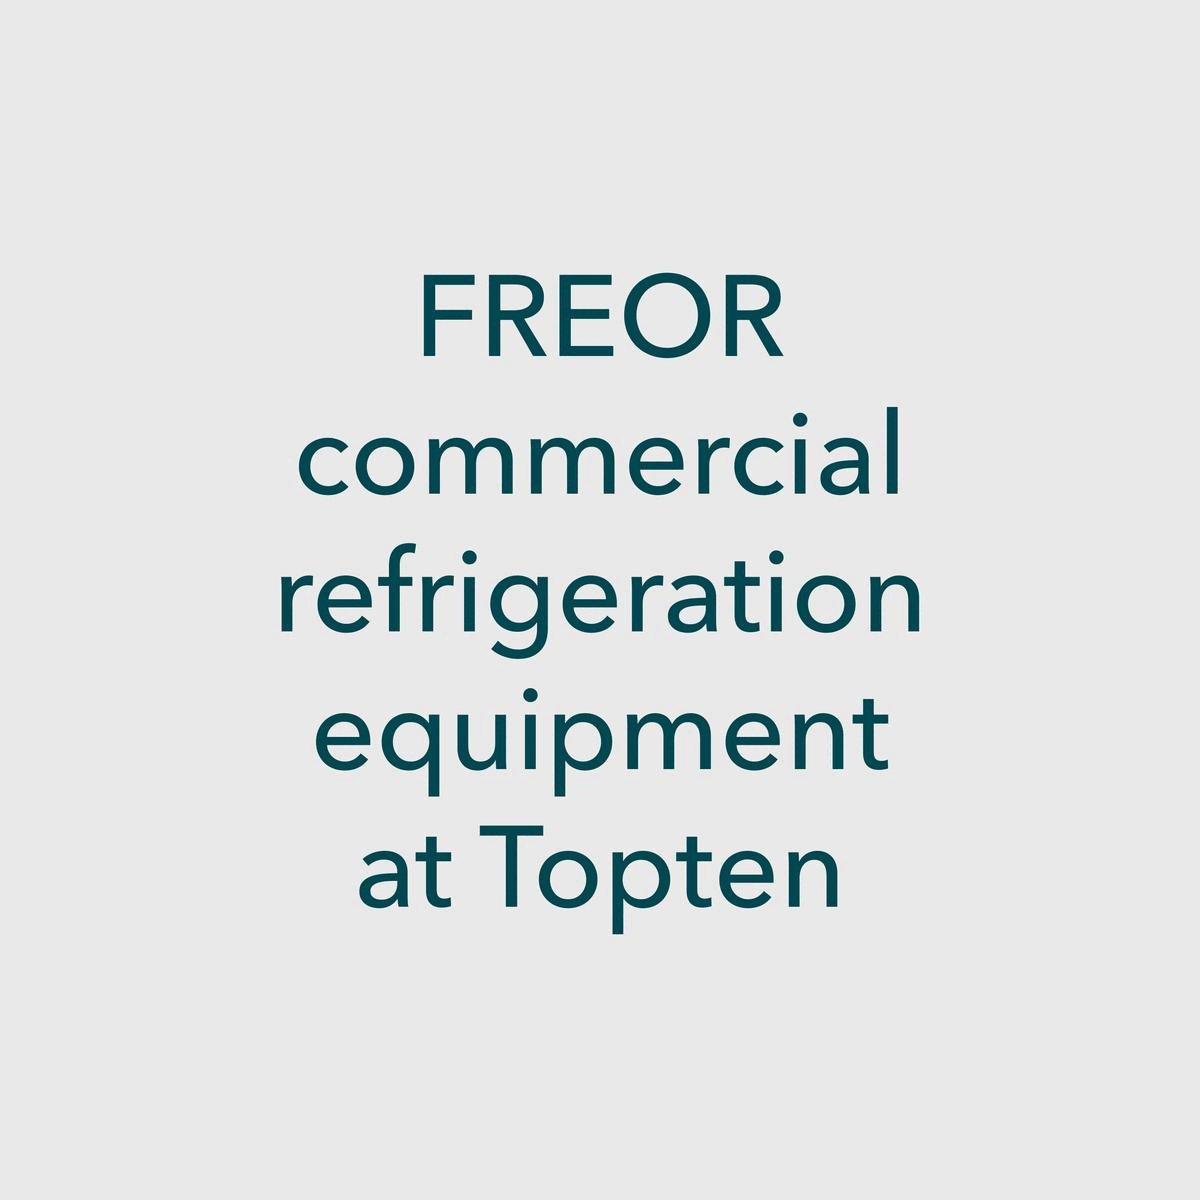 FREOR commercial refrigeration equipment